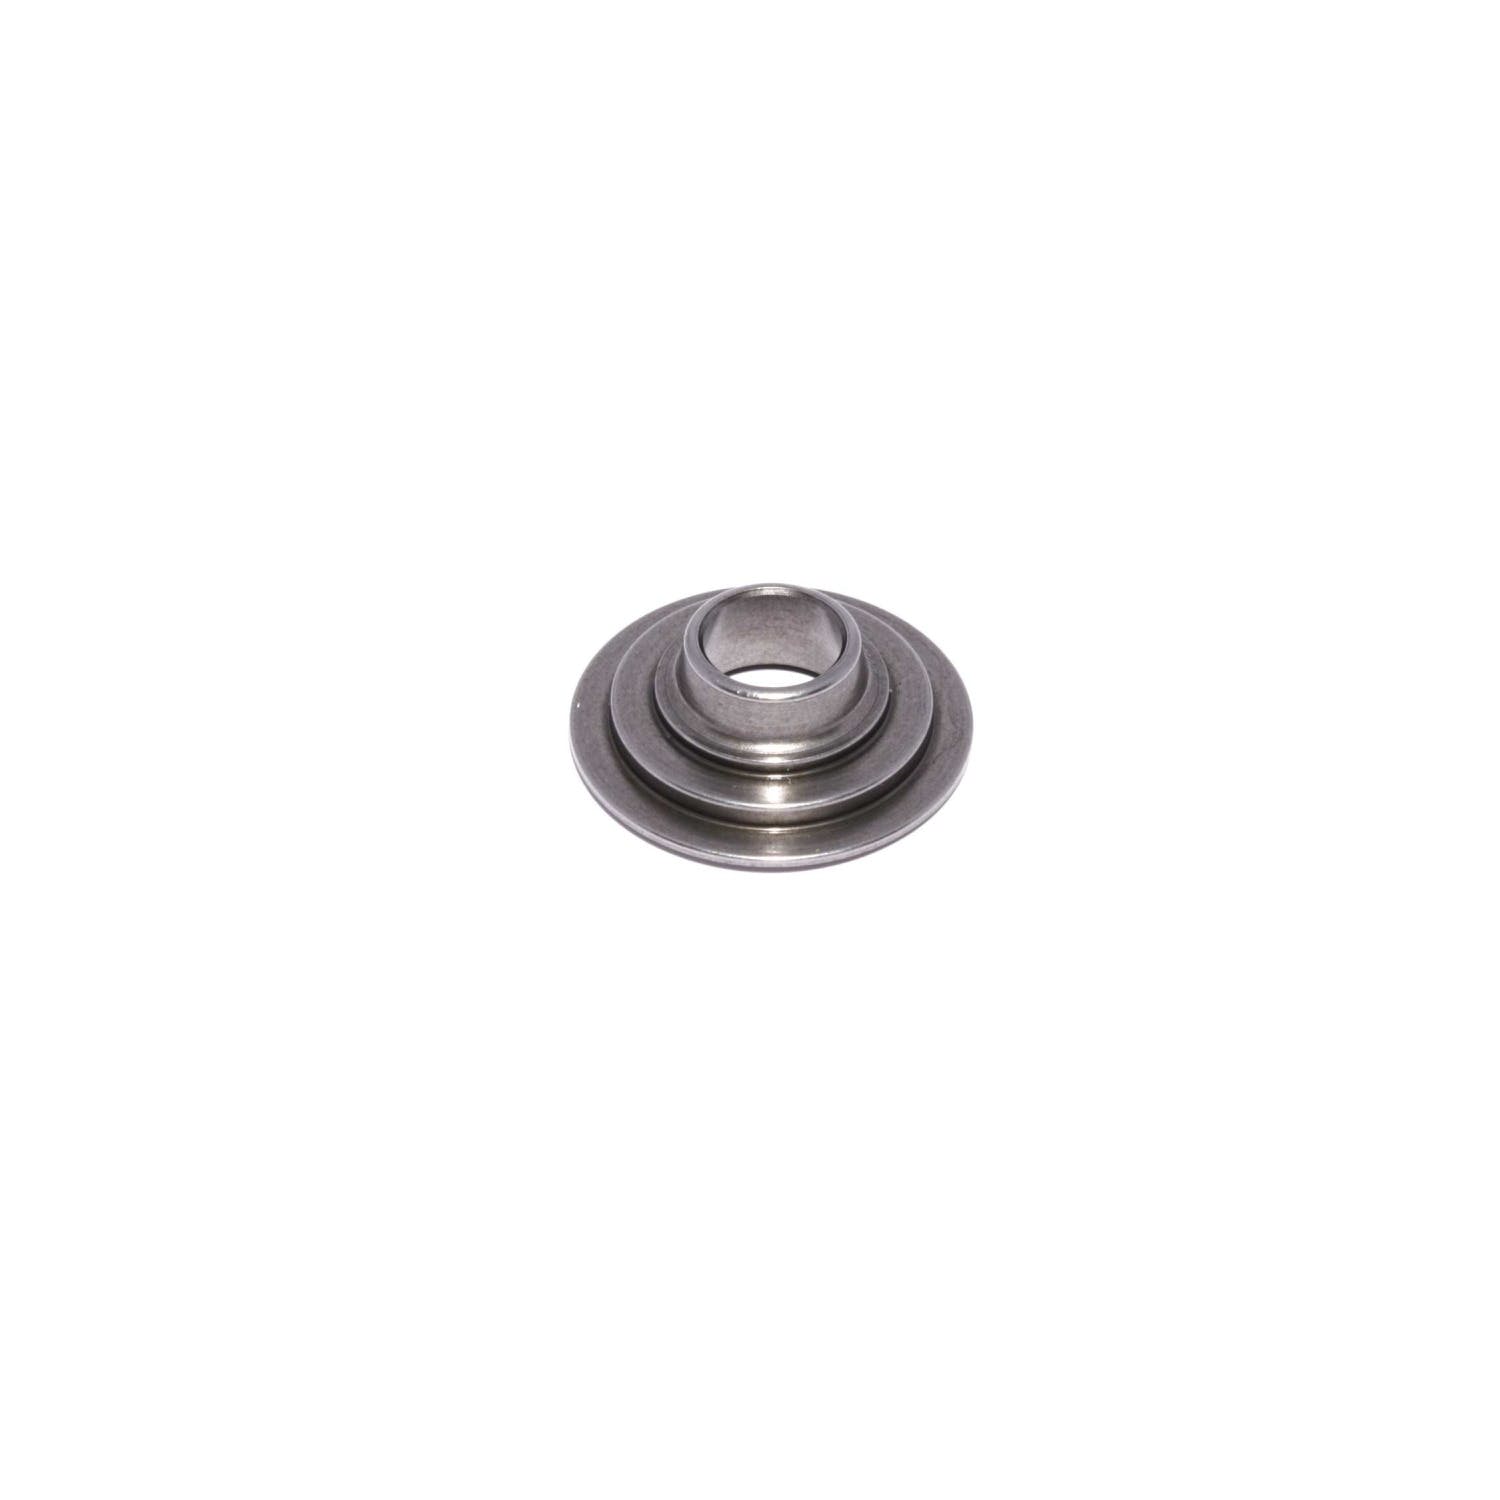 Competition Cams 1730-1 Lightweight Tool Steel Retainer